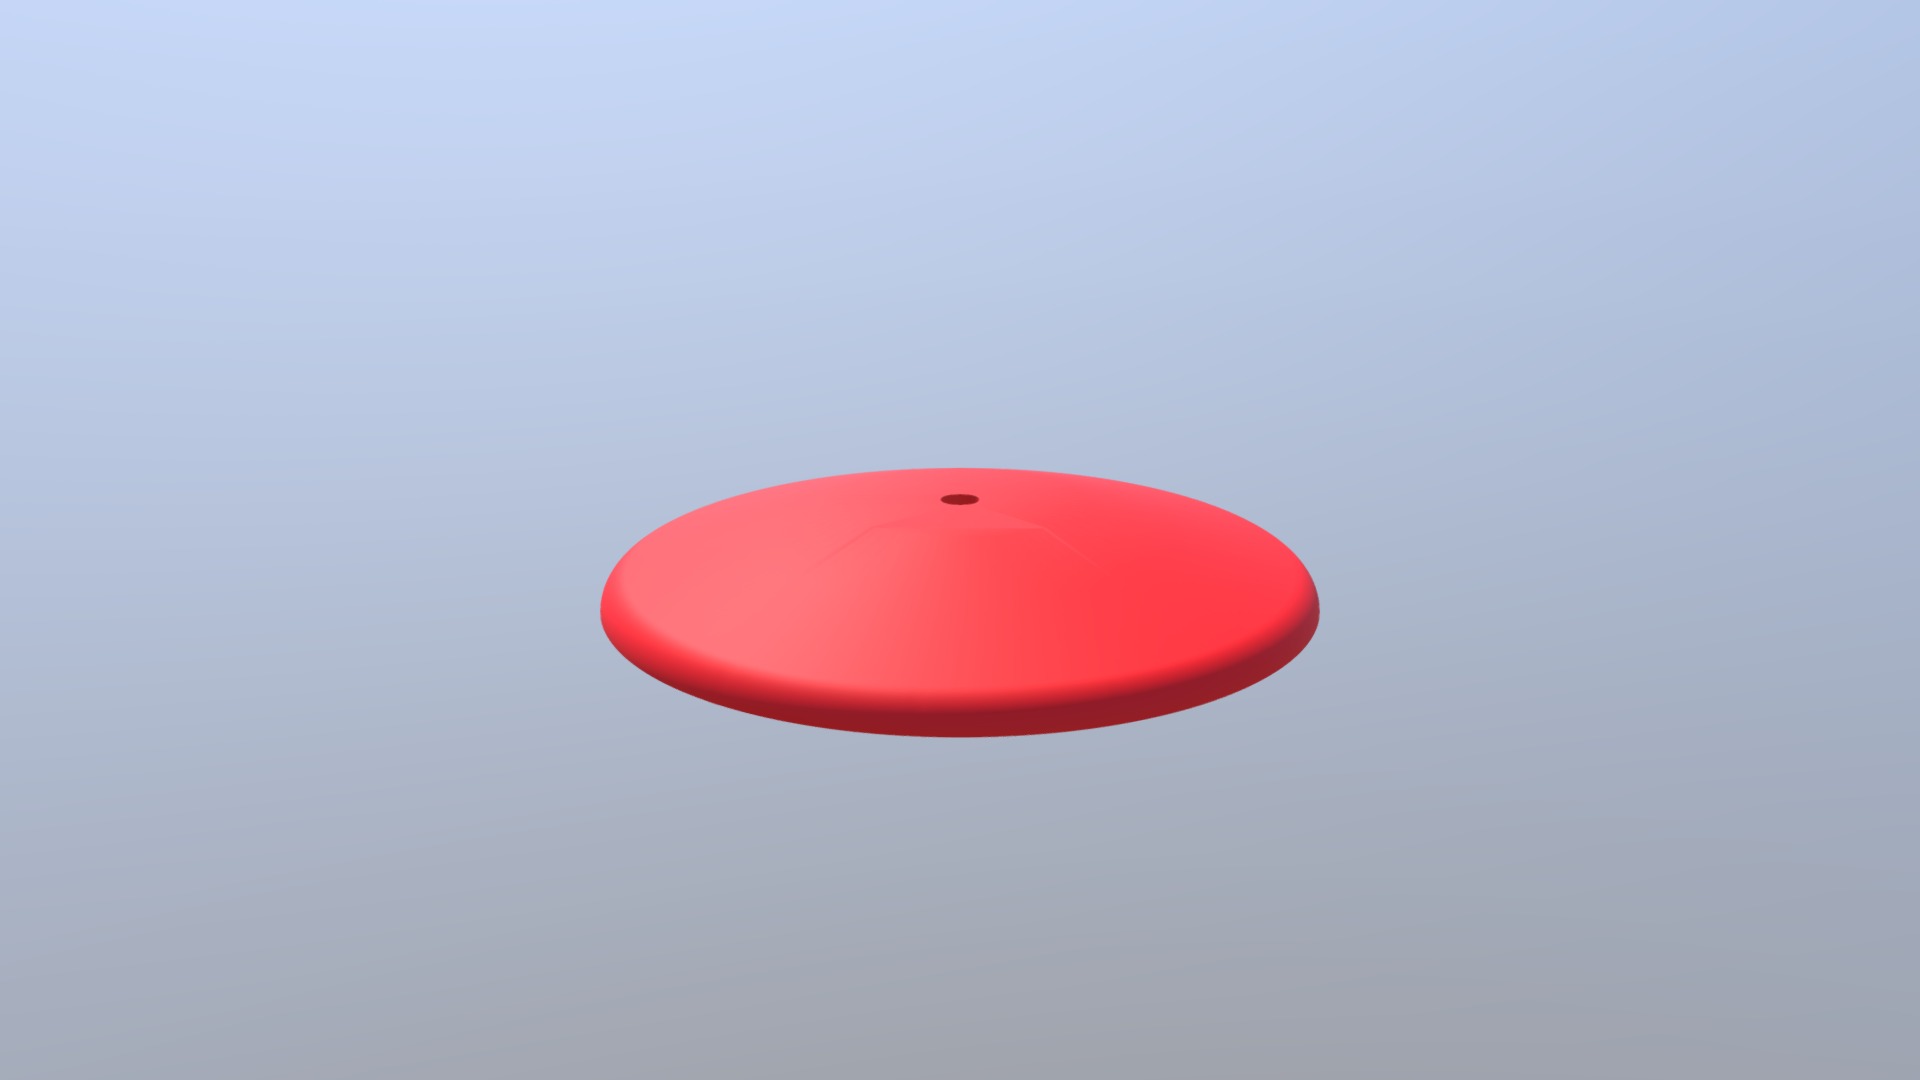 3D model Prism P7 – Stand/Base (FULL) - This is a 3D model of the Prism P7 - Stand/Base (FULL). The 3D model is about a red frisbee in the sky.